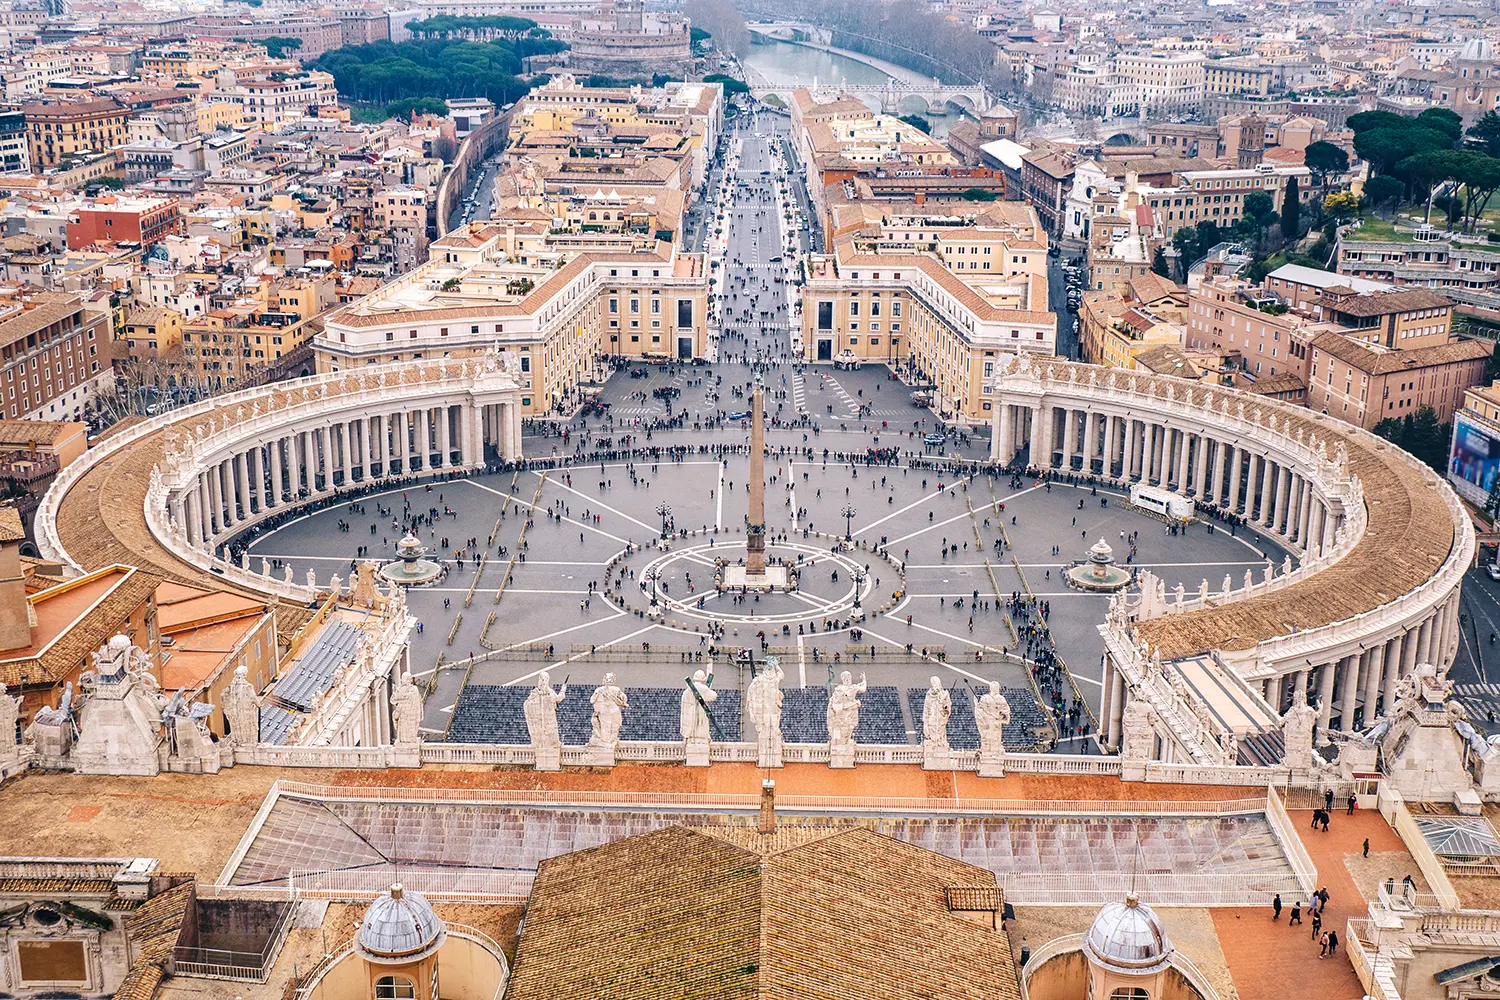 Saint Peters square in Vatican City, Rome, Italy